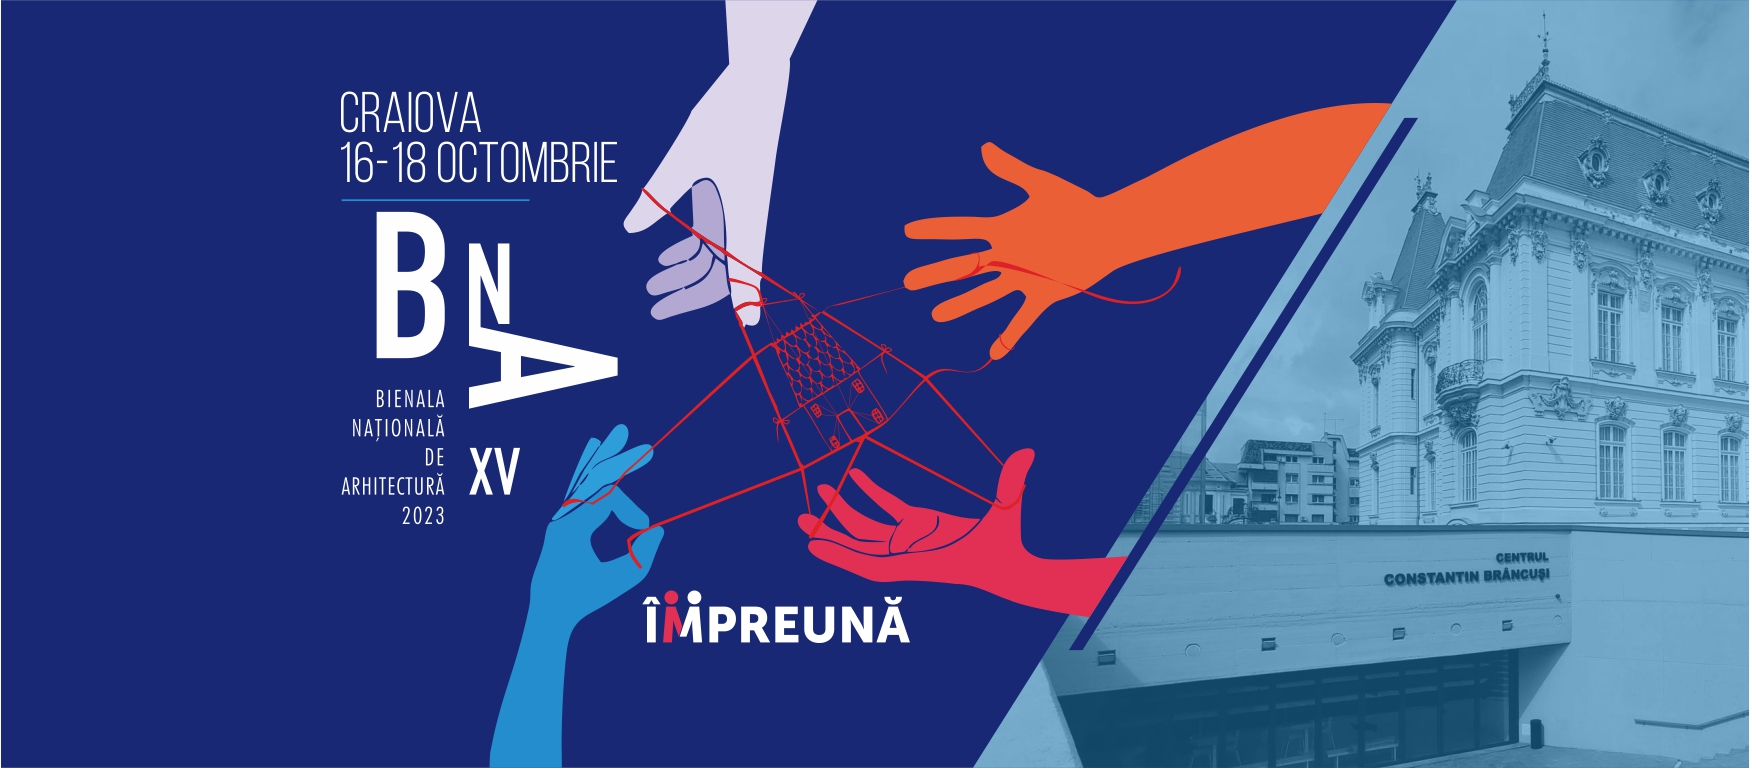 The National Architecture Biennale will also take place in Craiova this year